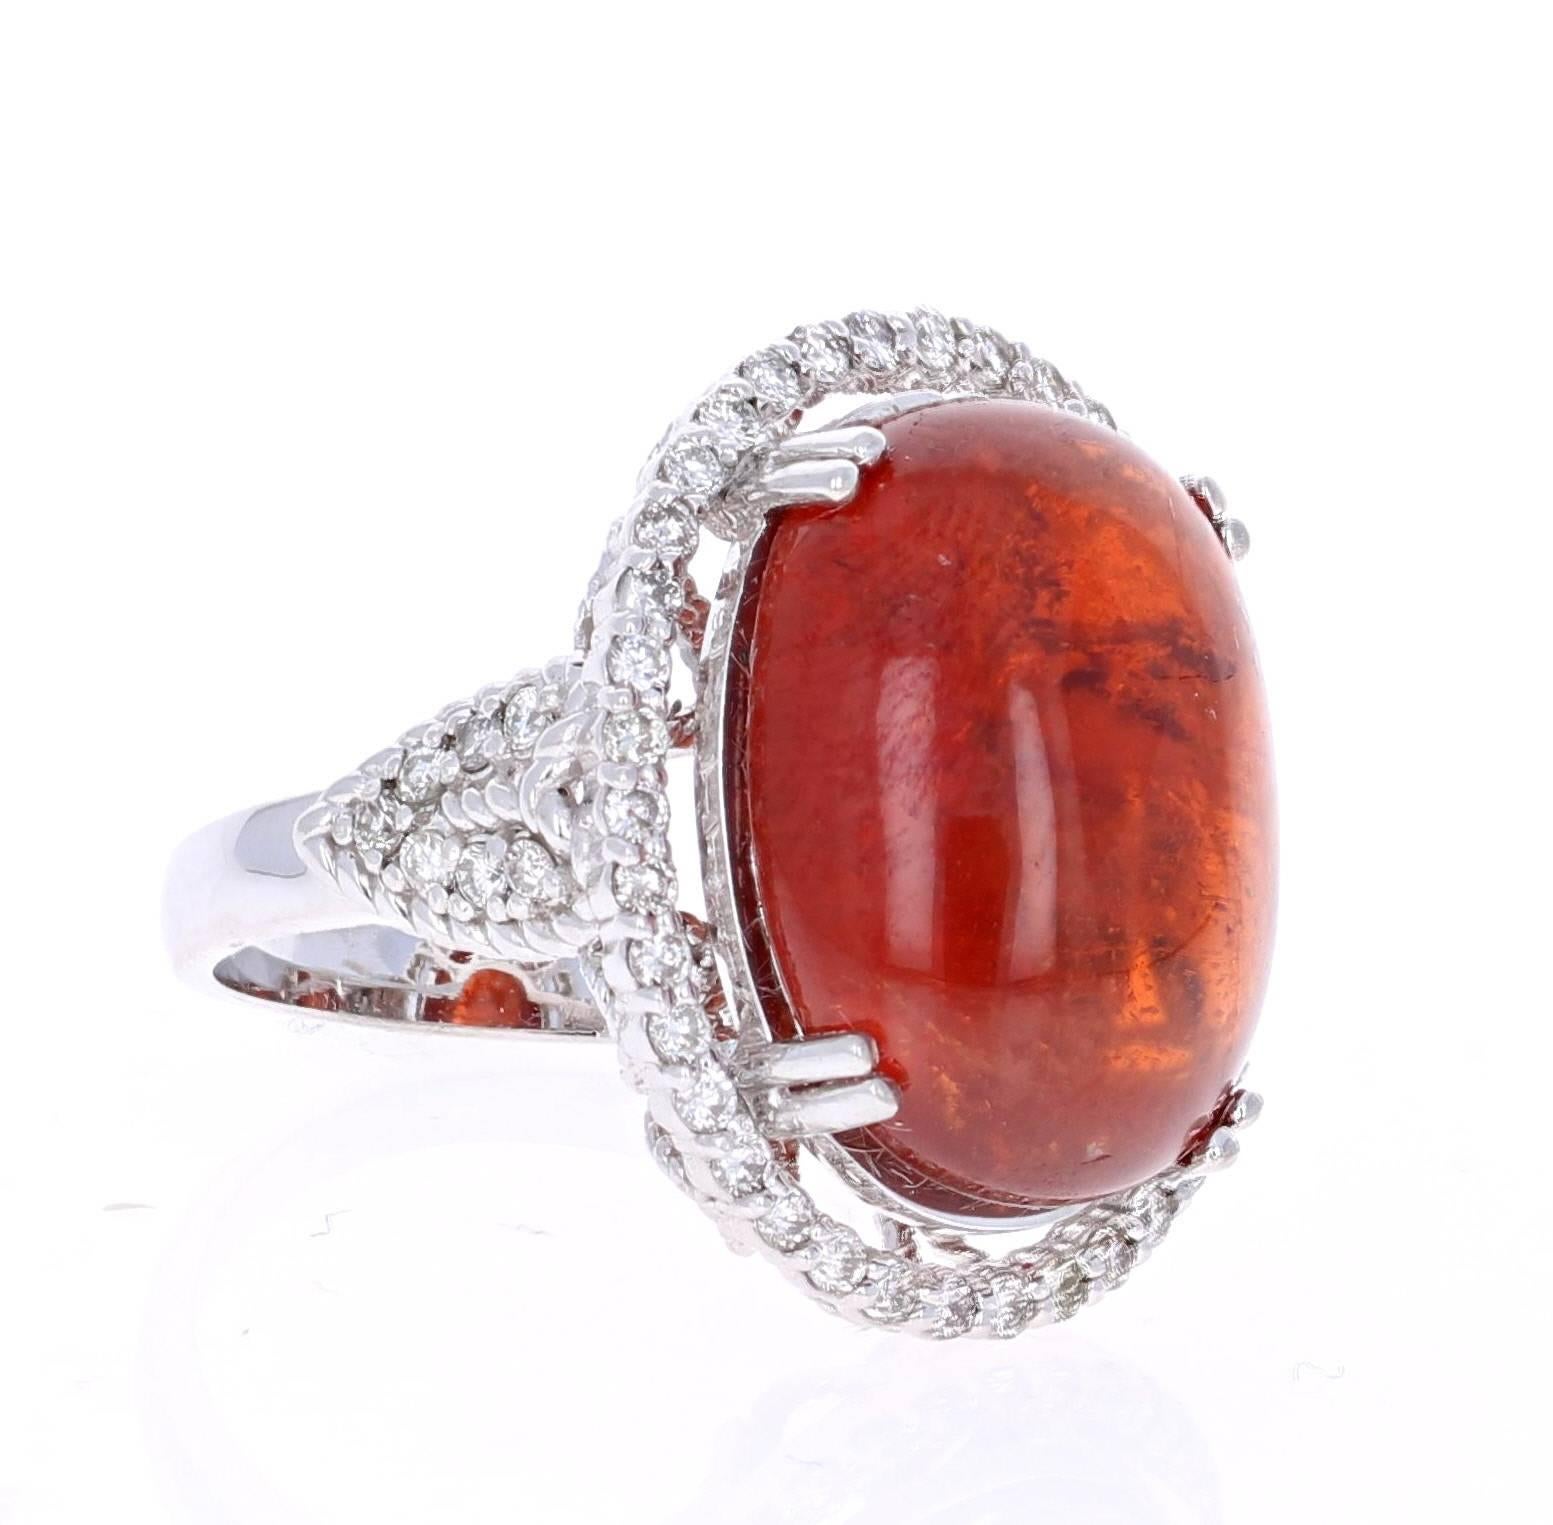 26.97 Carat Cabochon Spessartite Diamond White Gold Cocktail Ring!
This beautiful ring has a huge 26.12 carat Cabochon Spessartite set in the center of the ring. A Spessartite is a natural stone that is actually a part of the Garnet family of